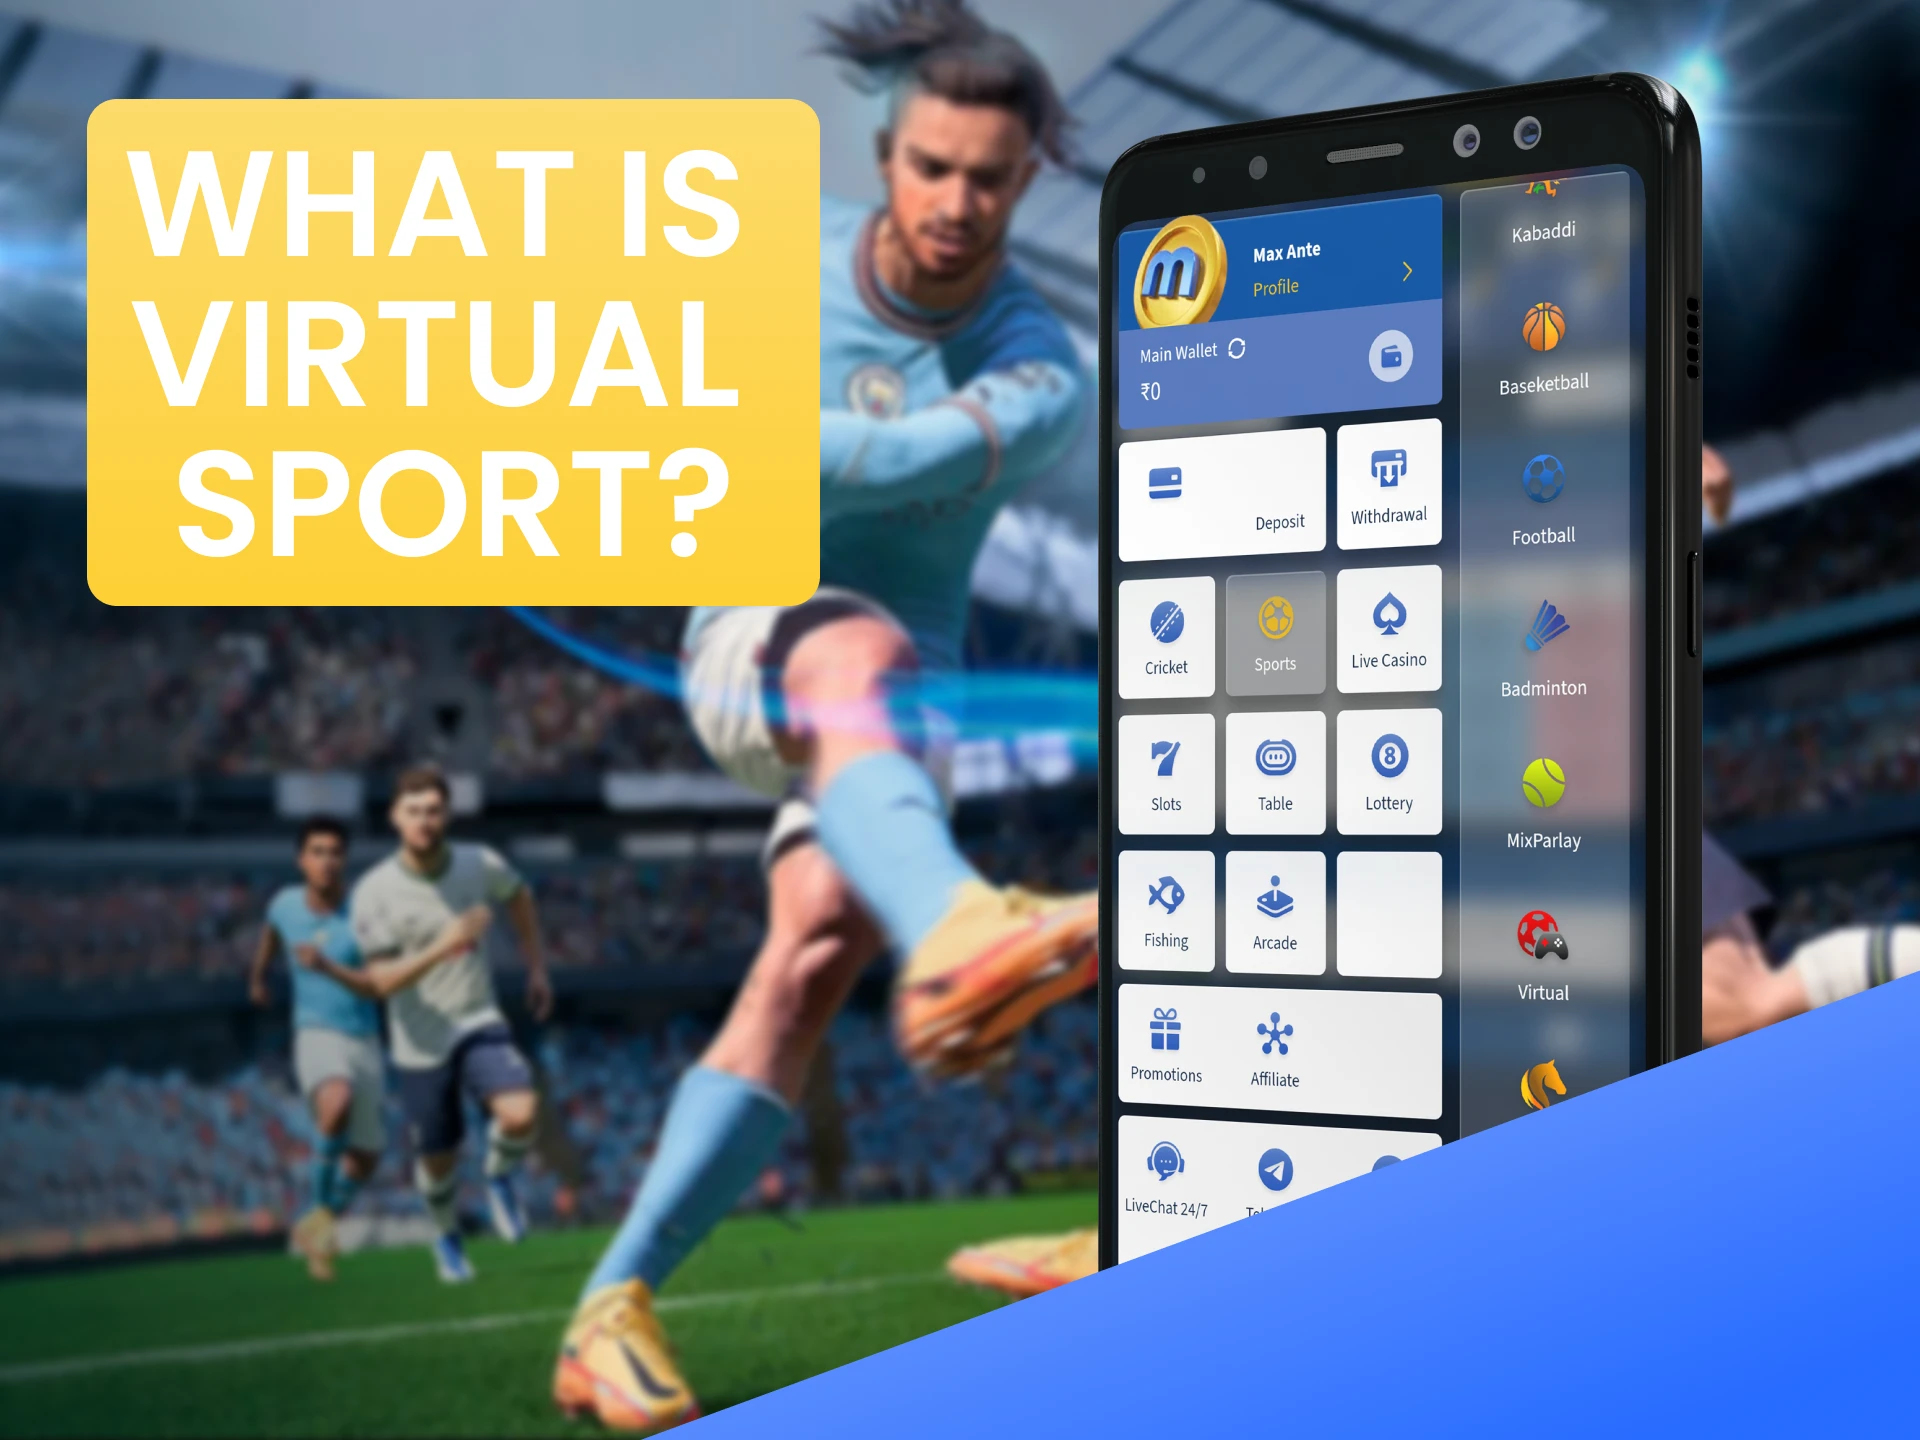 Learn all about virtual sports at Mostplay.